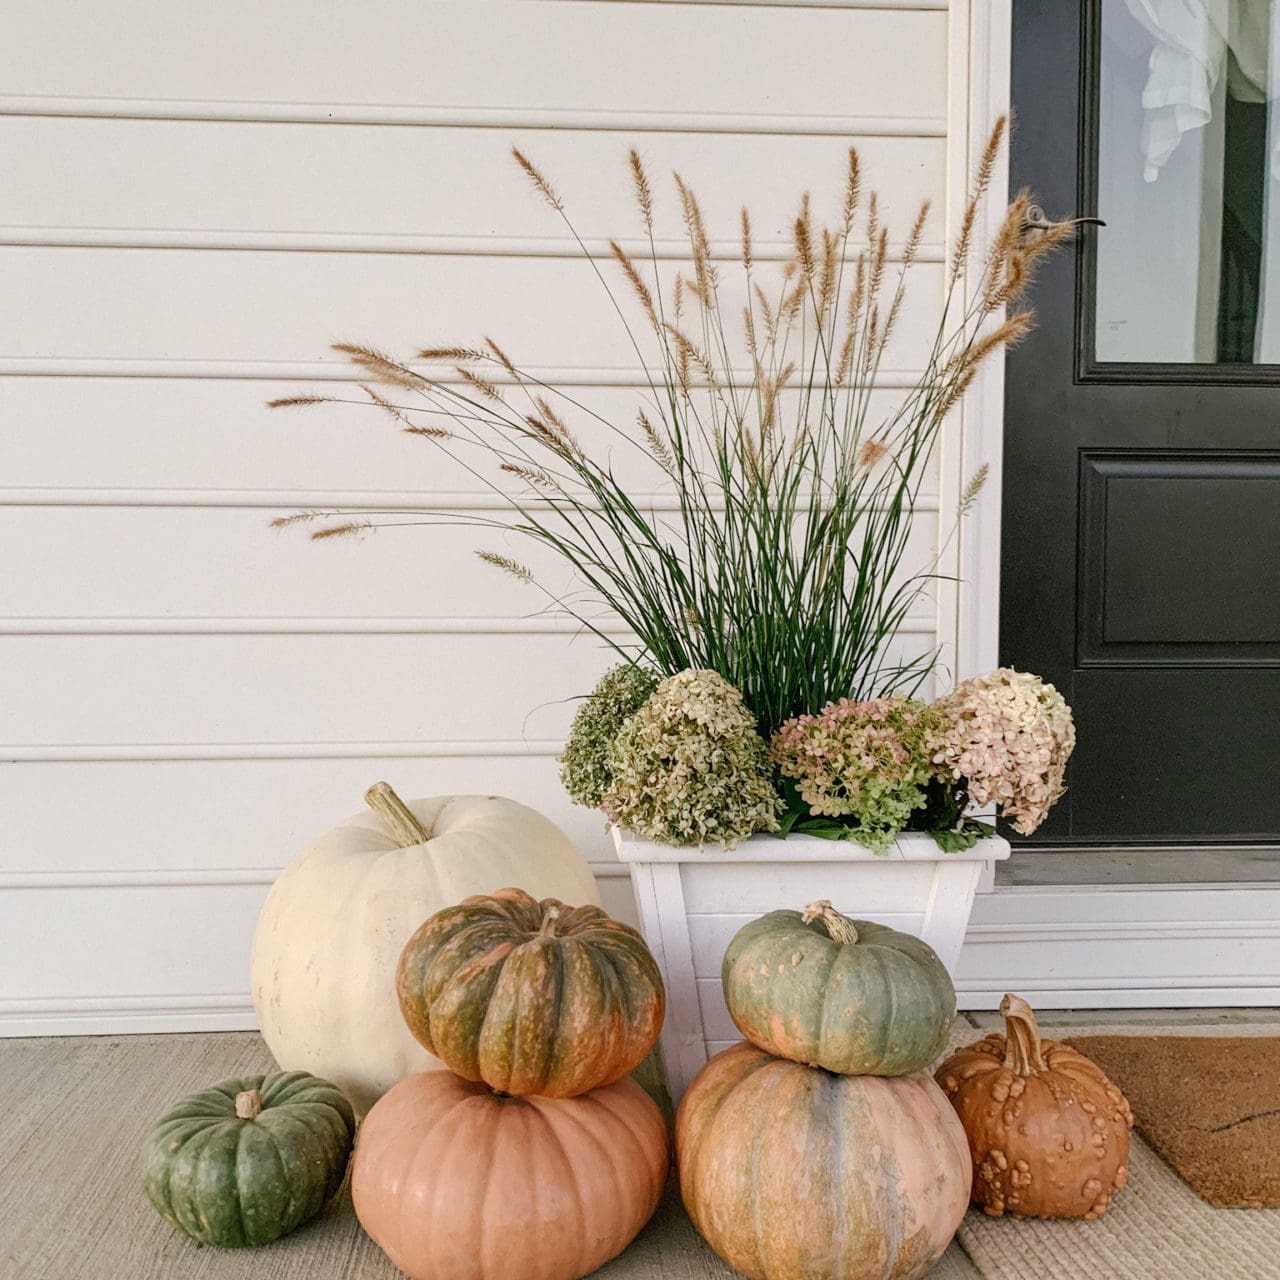 Fall Porch with Dried Hydrangeas and Grass